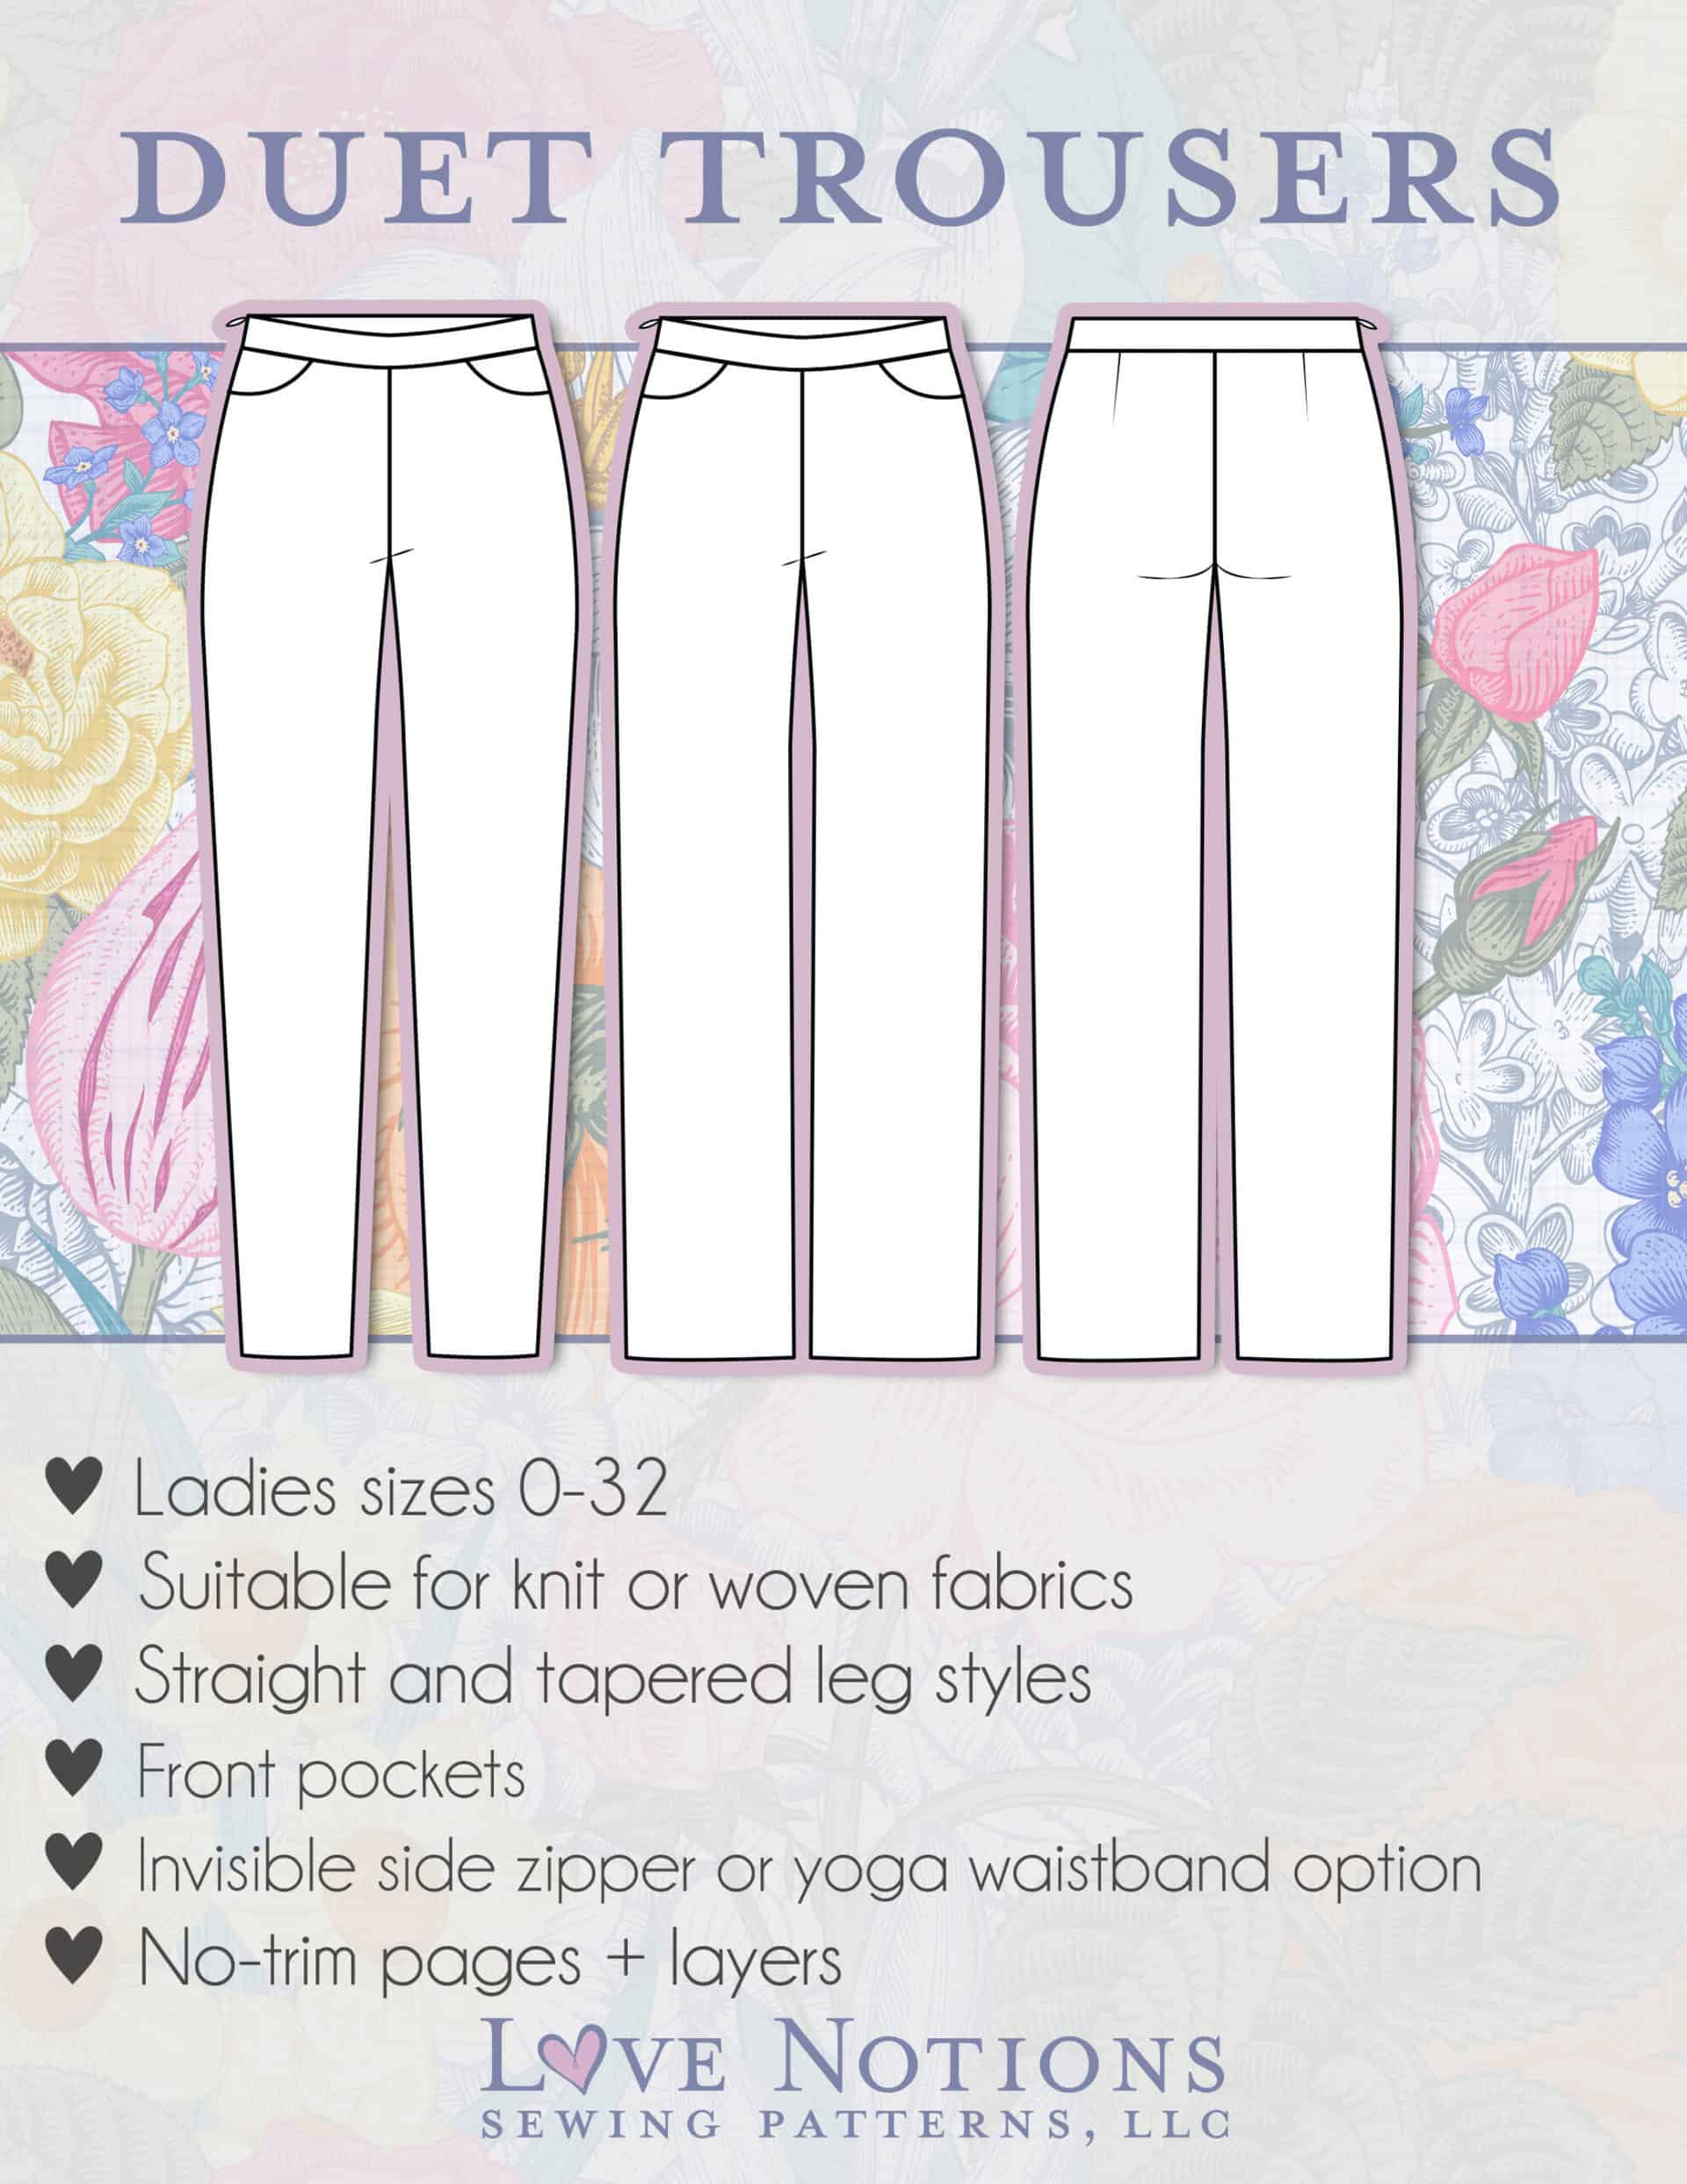 Learn How to Draft the Basic Pants Pattern - The Shapes of Fabric